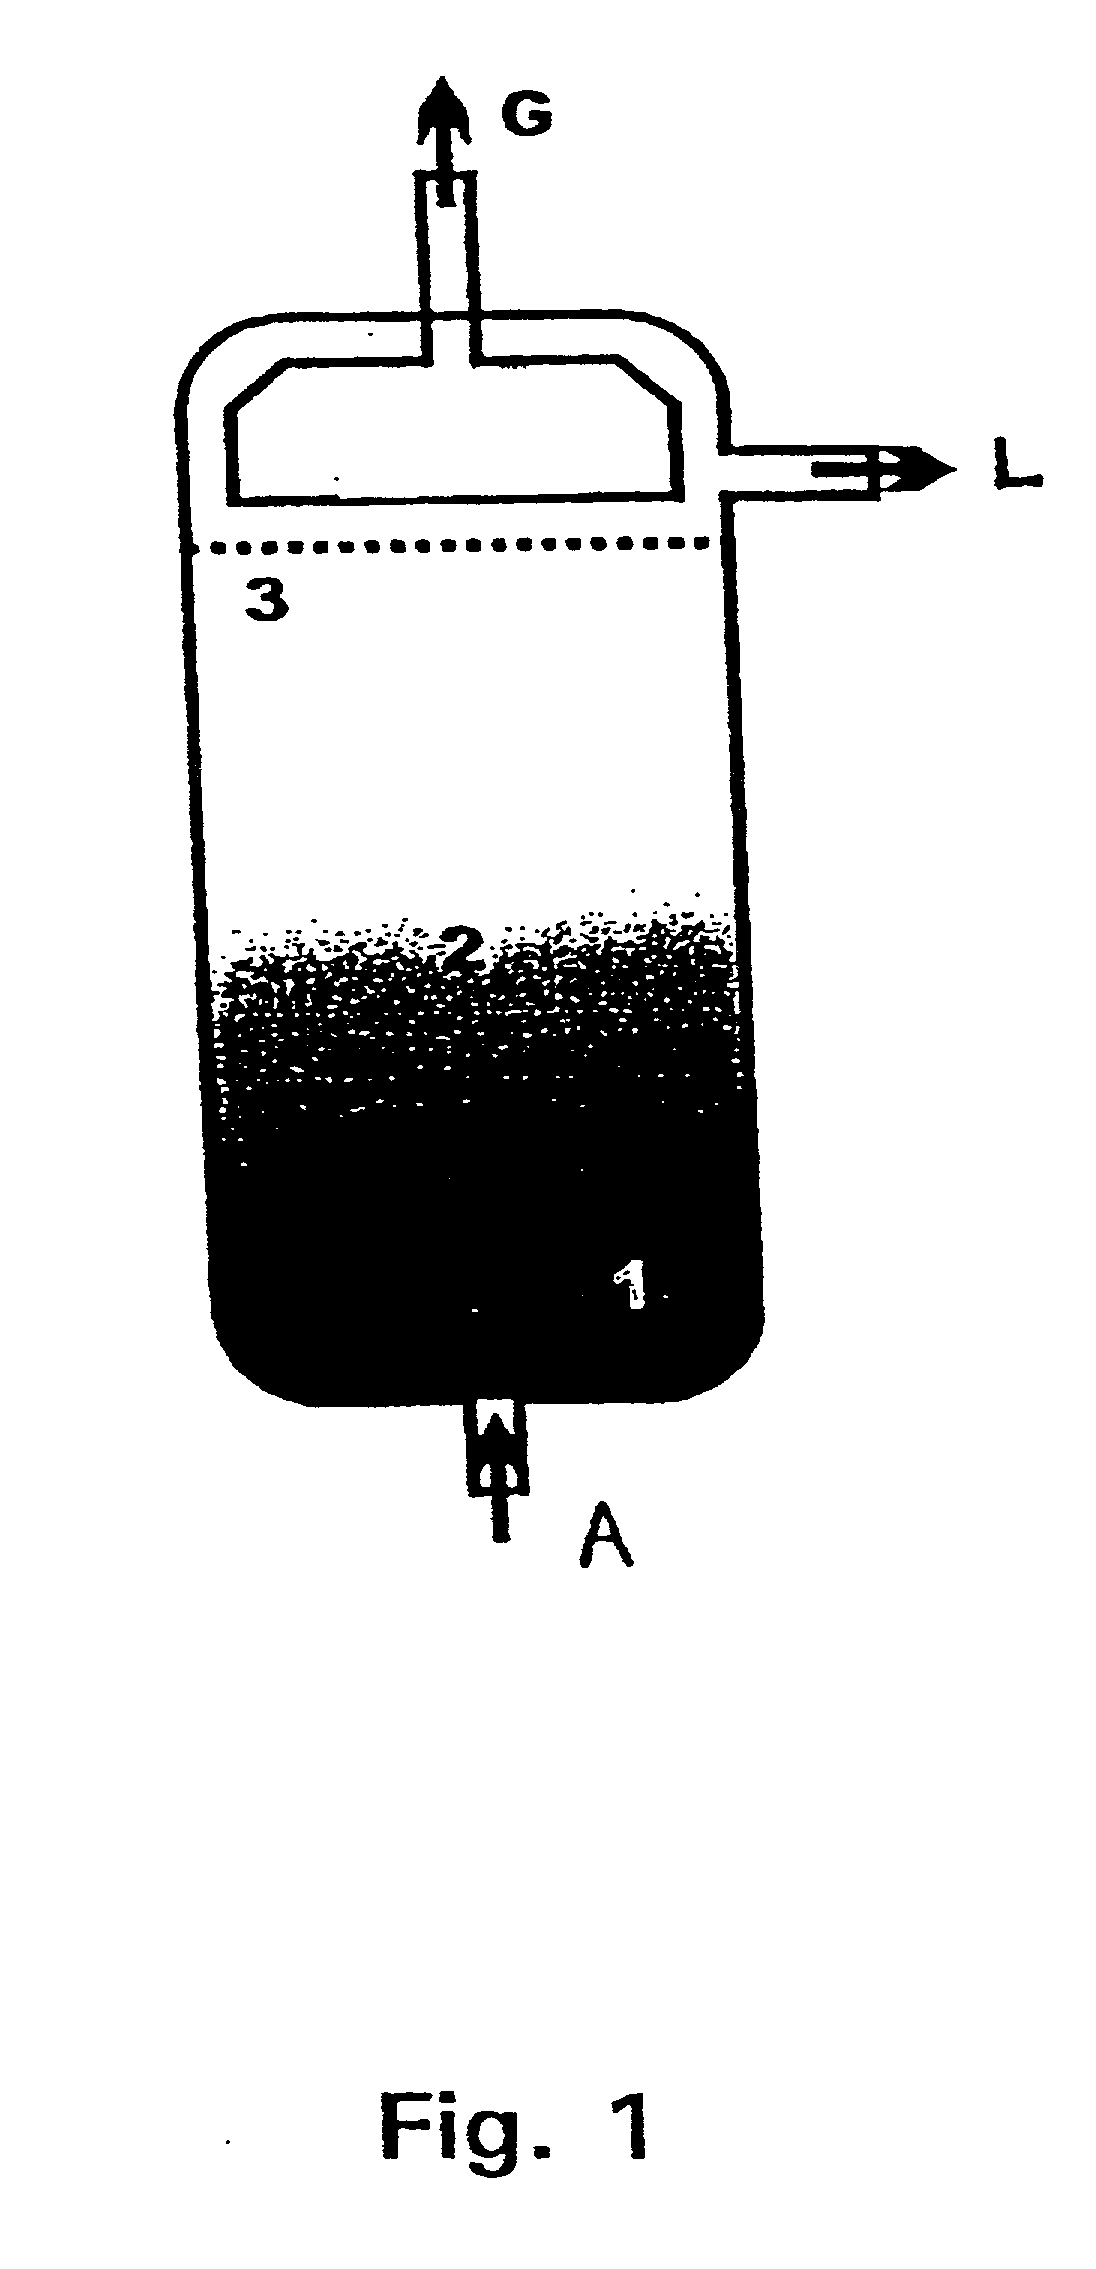 Method for processing lignocellulosic material